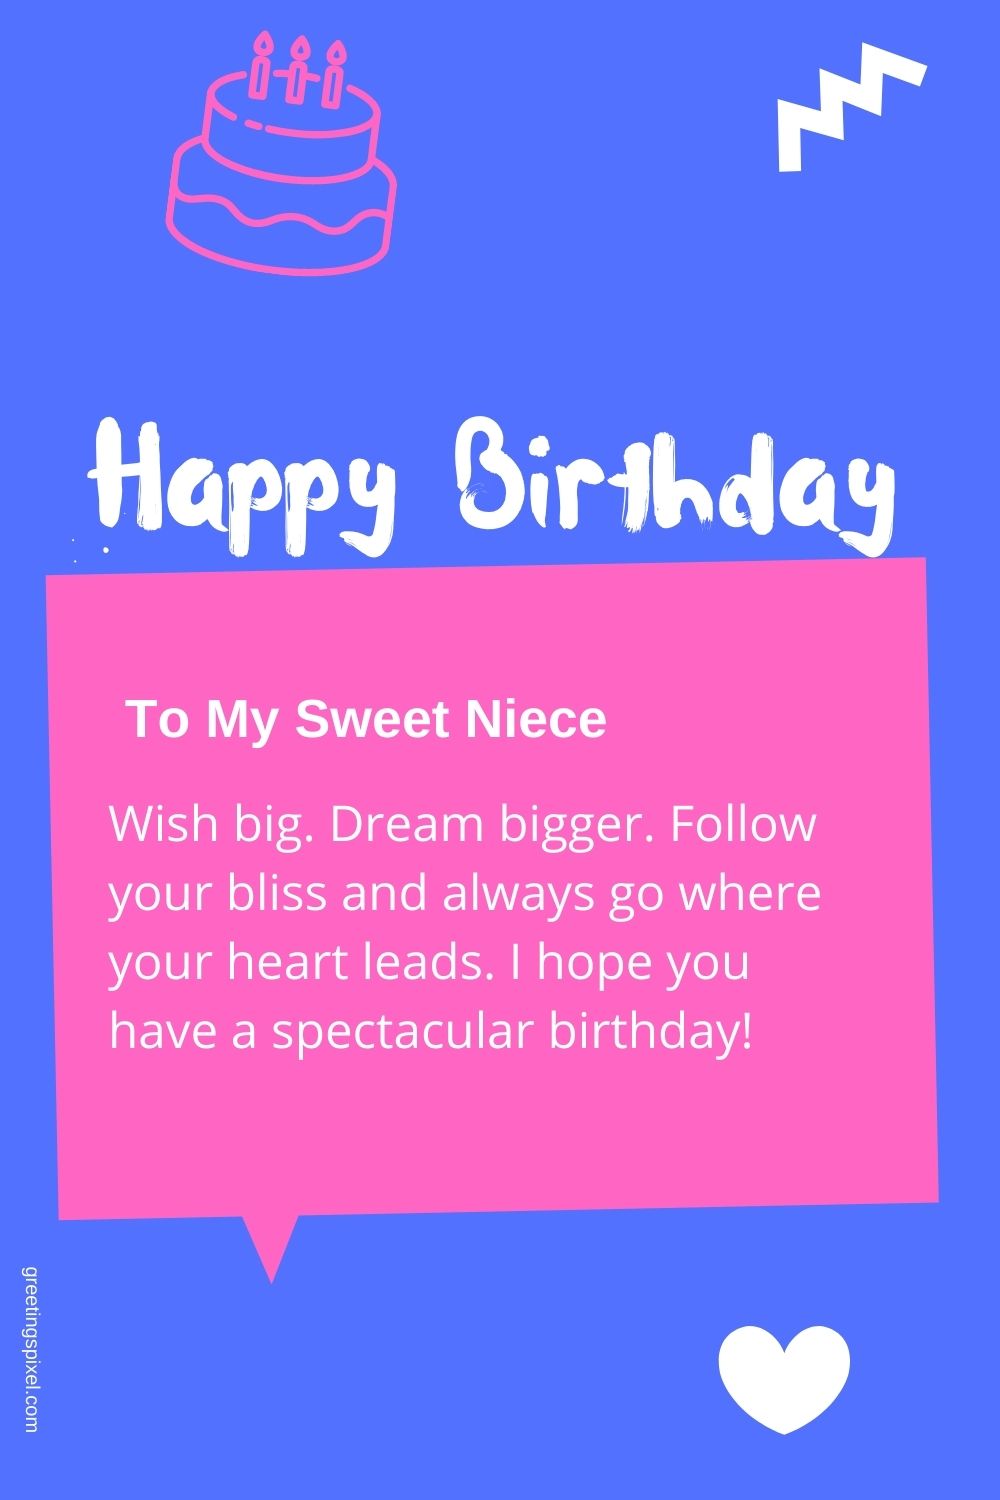 happy birthday niece images and quotes